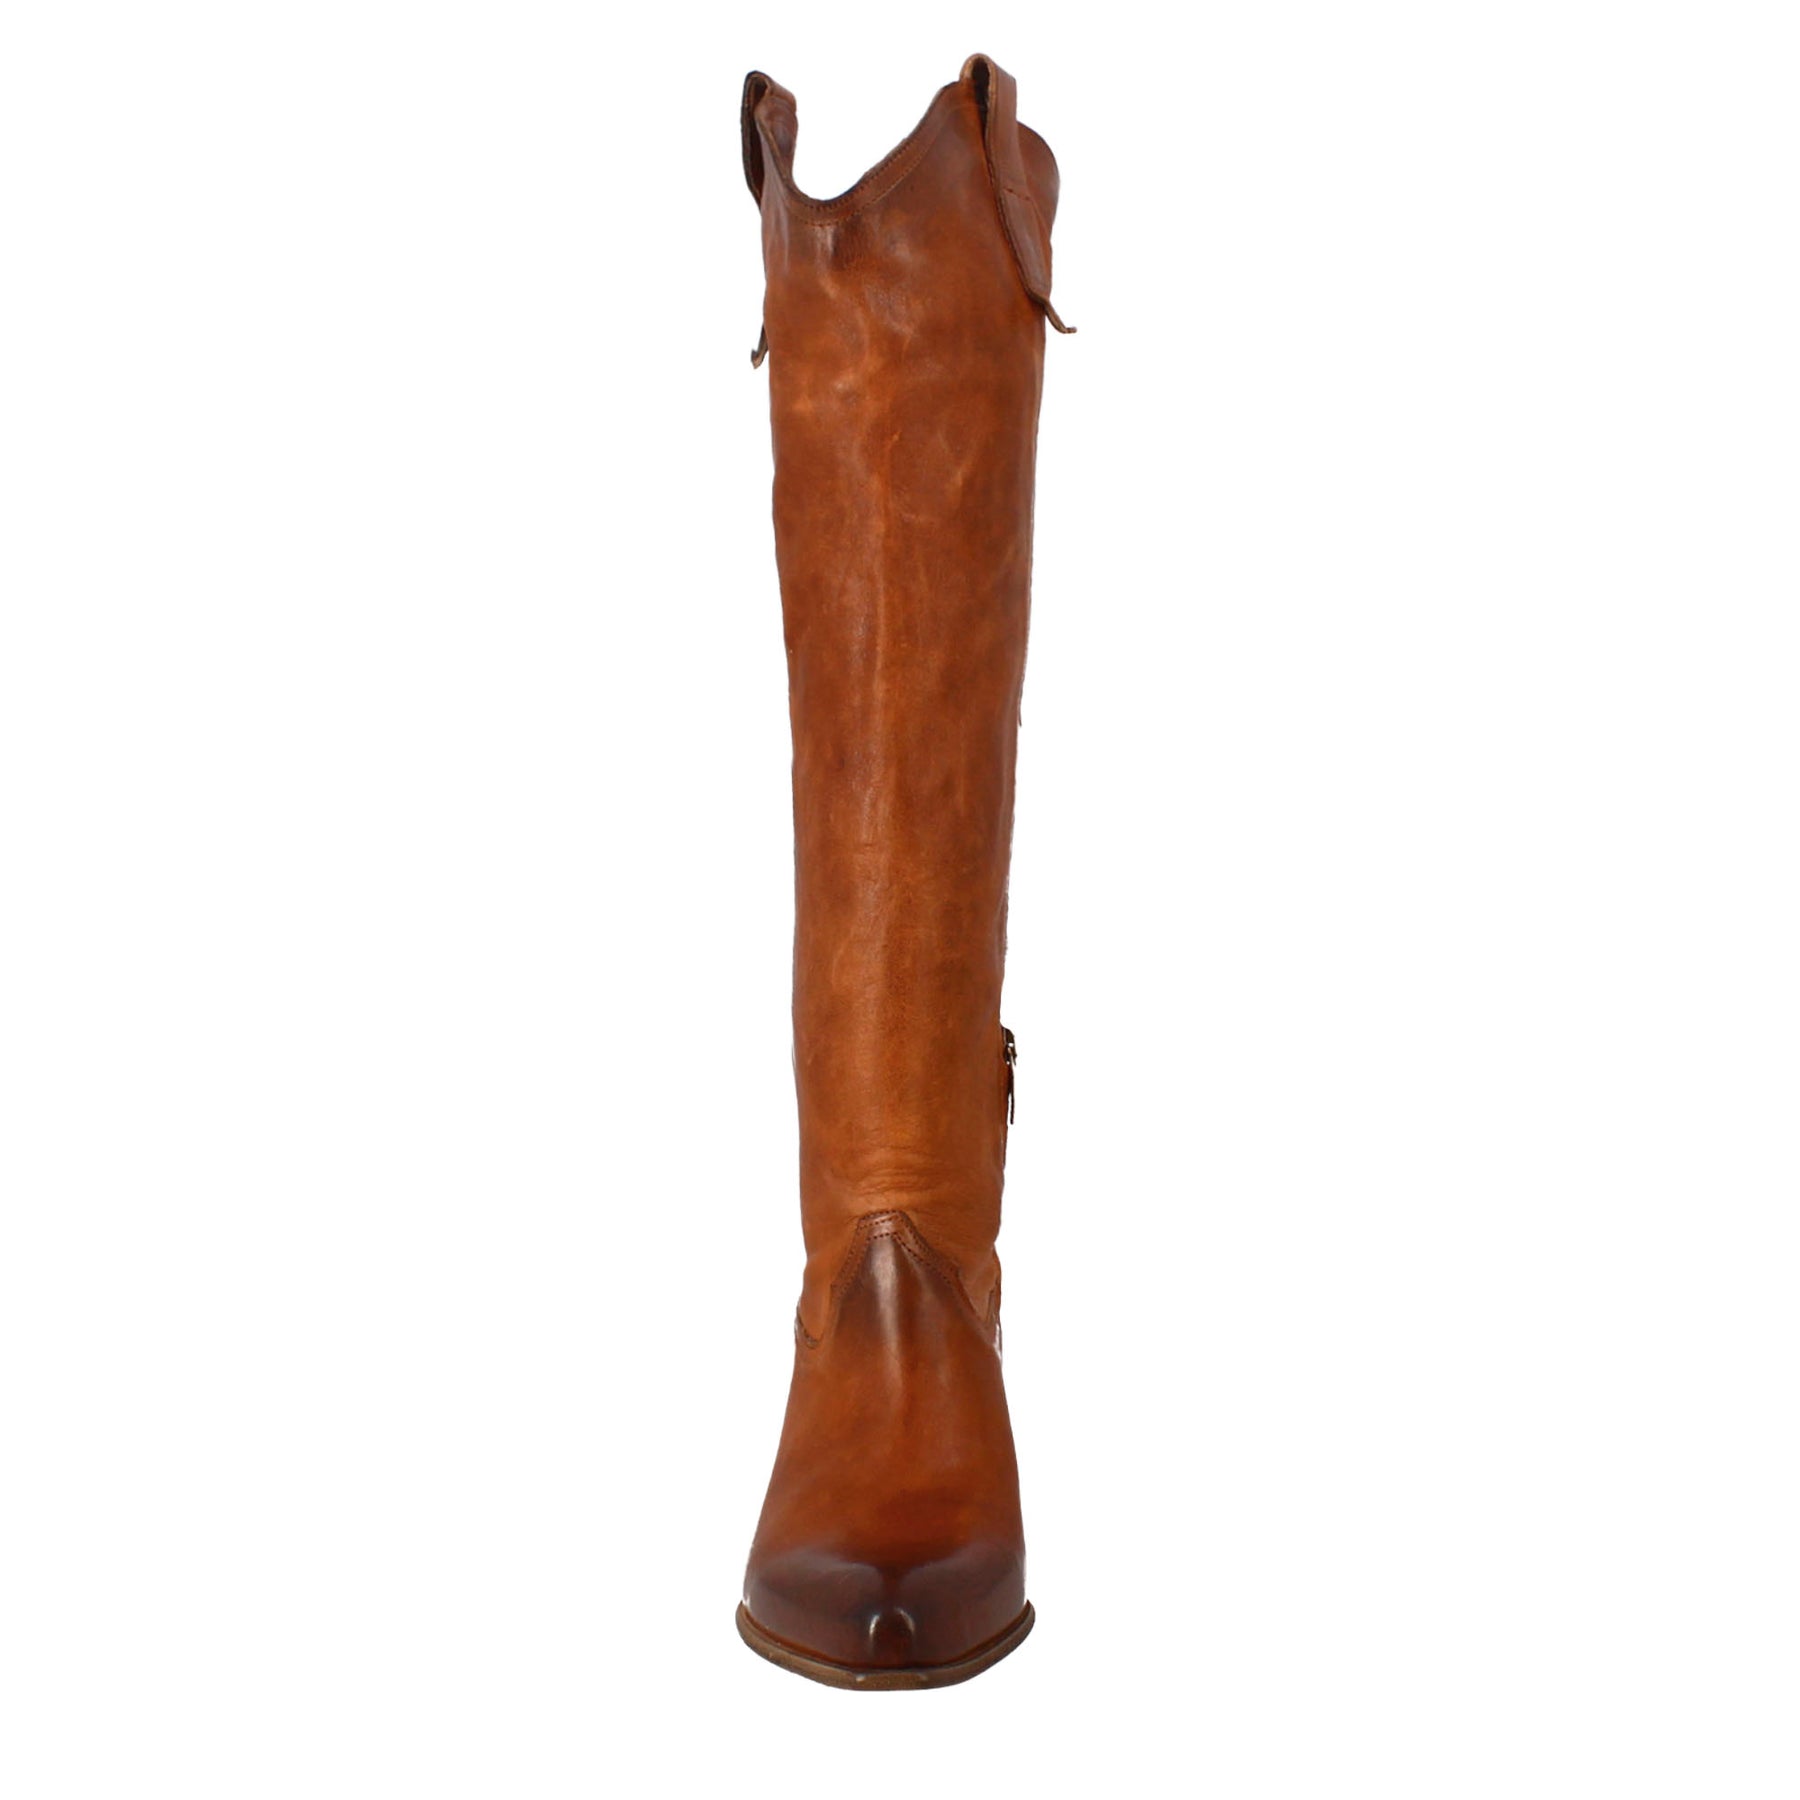 Women's handmade Texan high boots in tan leather with zip